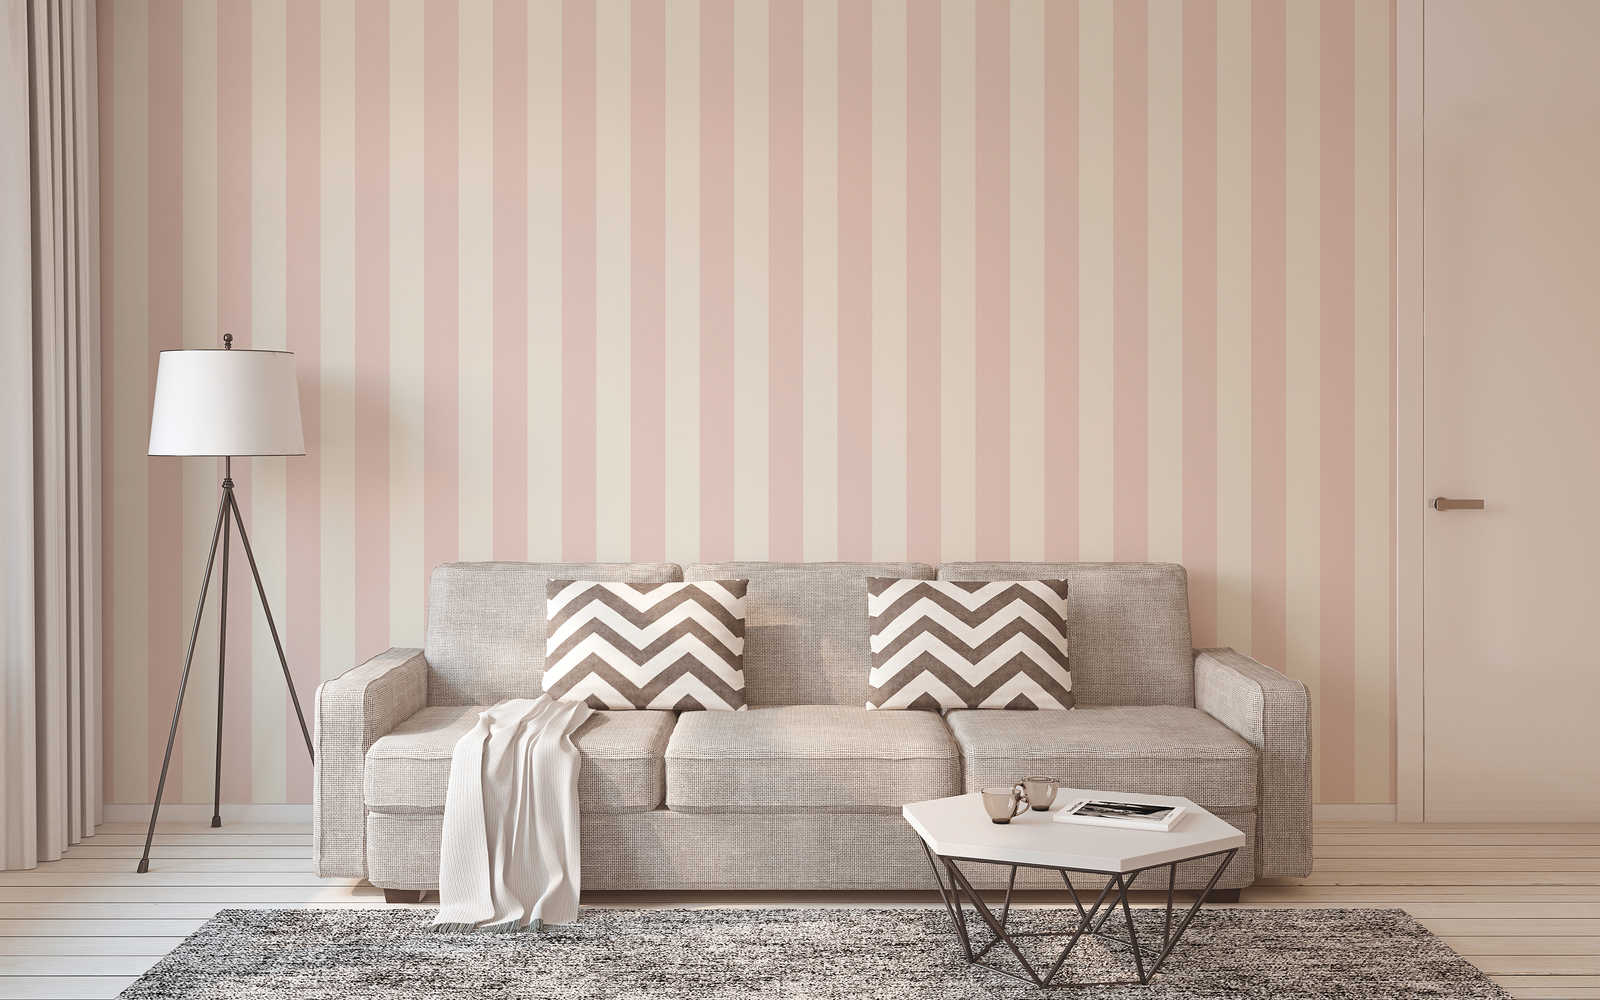             Stripes wallpaper with textured pattern, block stripes pink & white
        